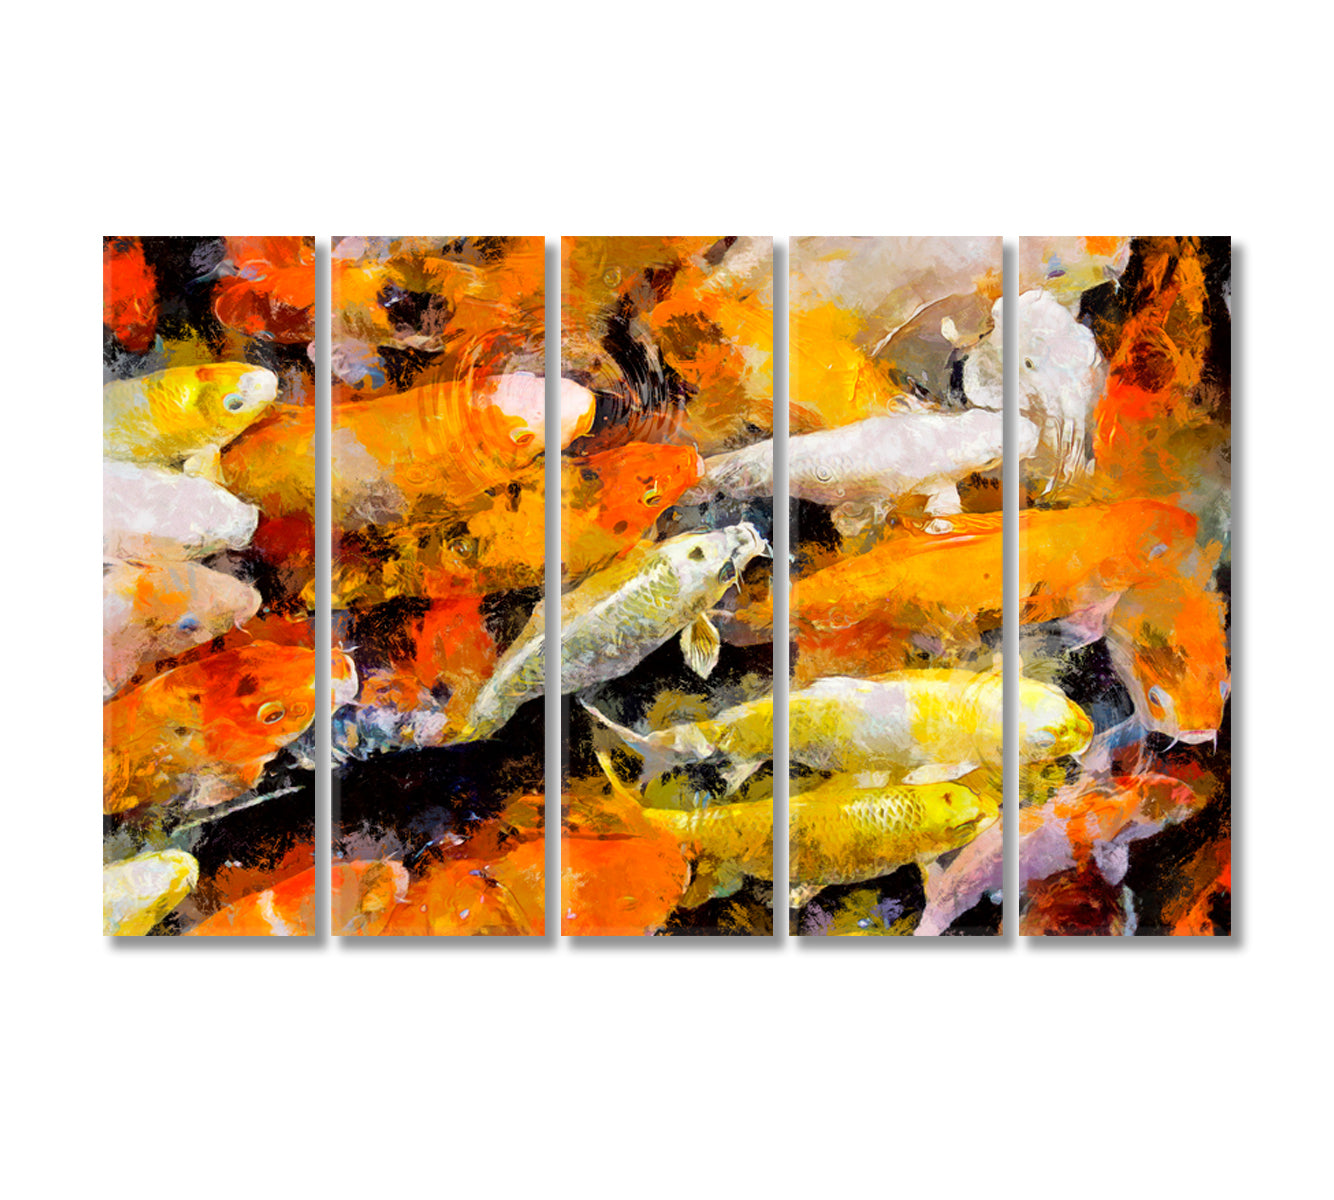 Japanese Koi Fishes Art For Home-Canvas Print-CetArt-5 Panels-36x24 inches-CetArt